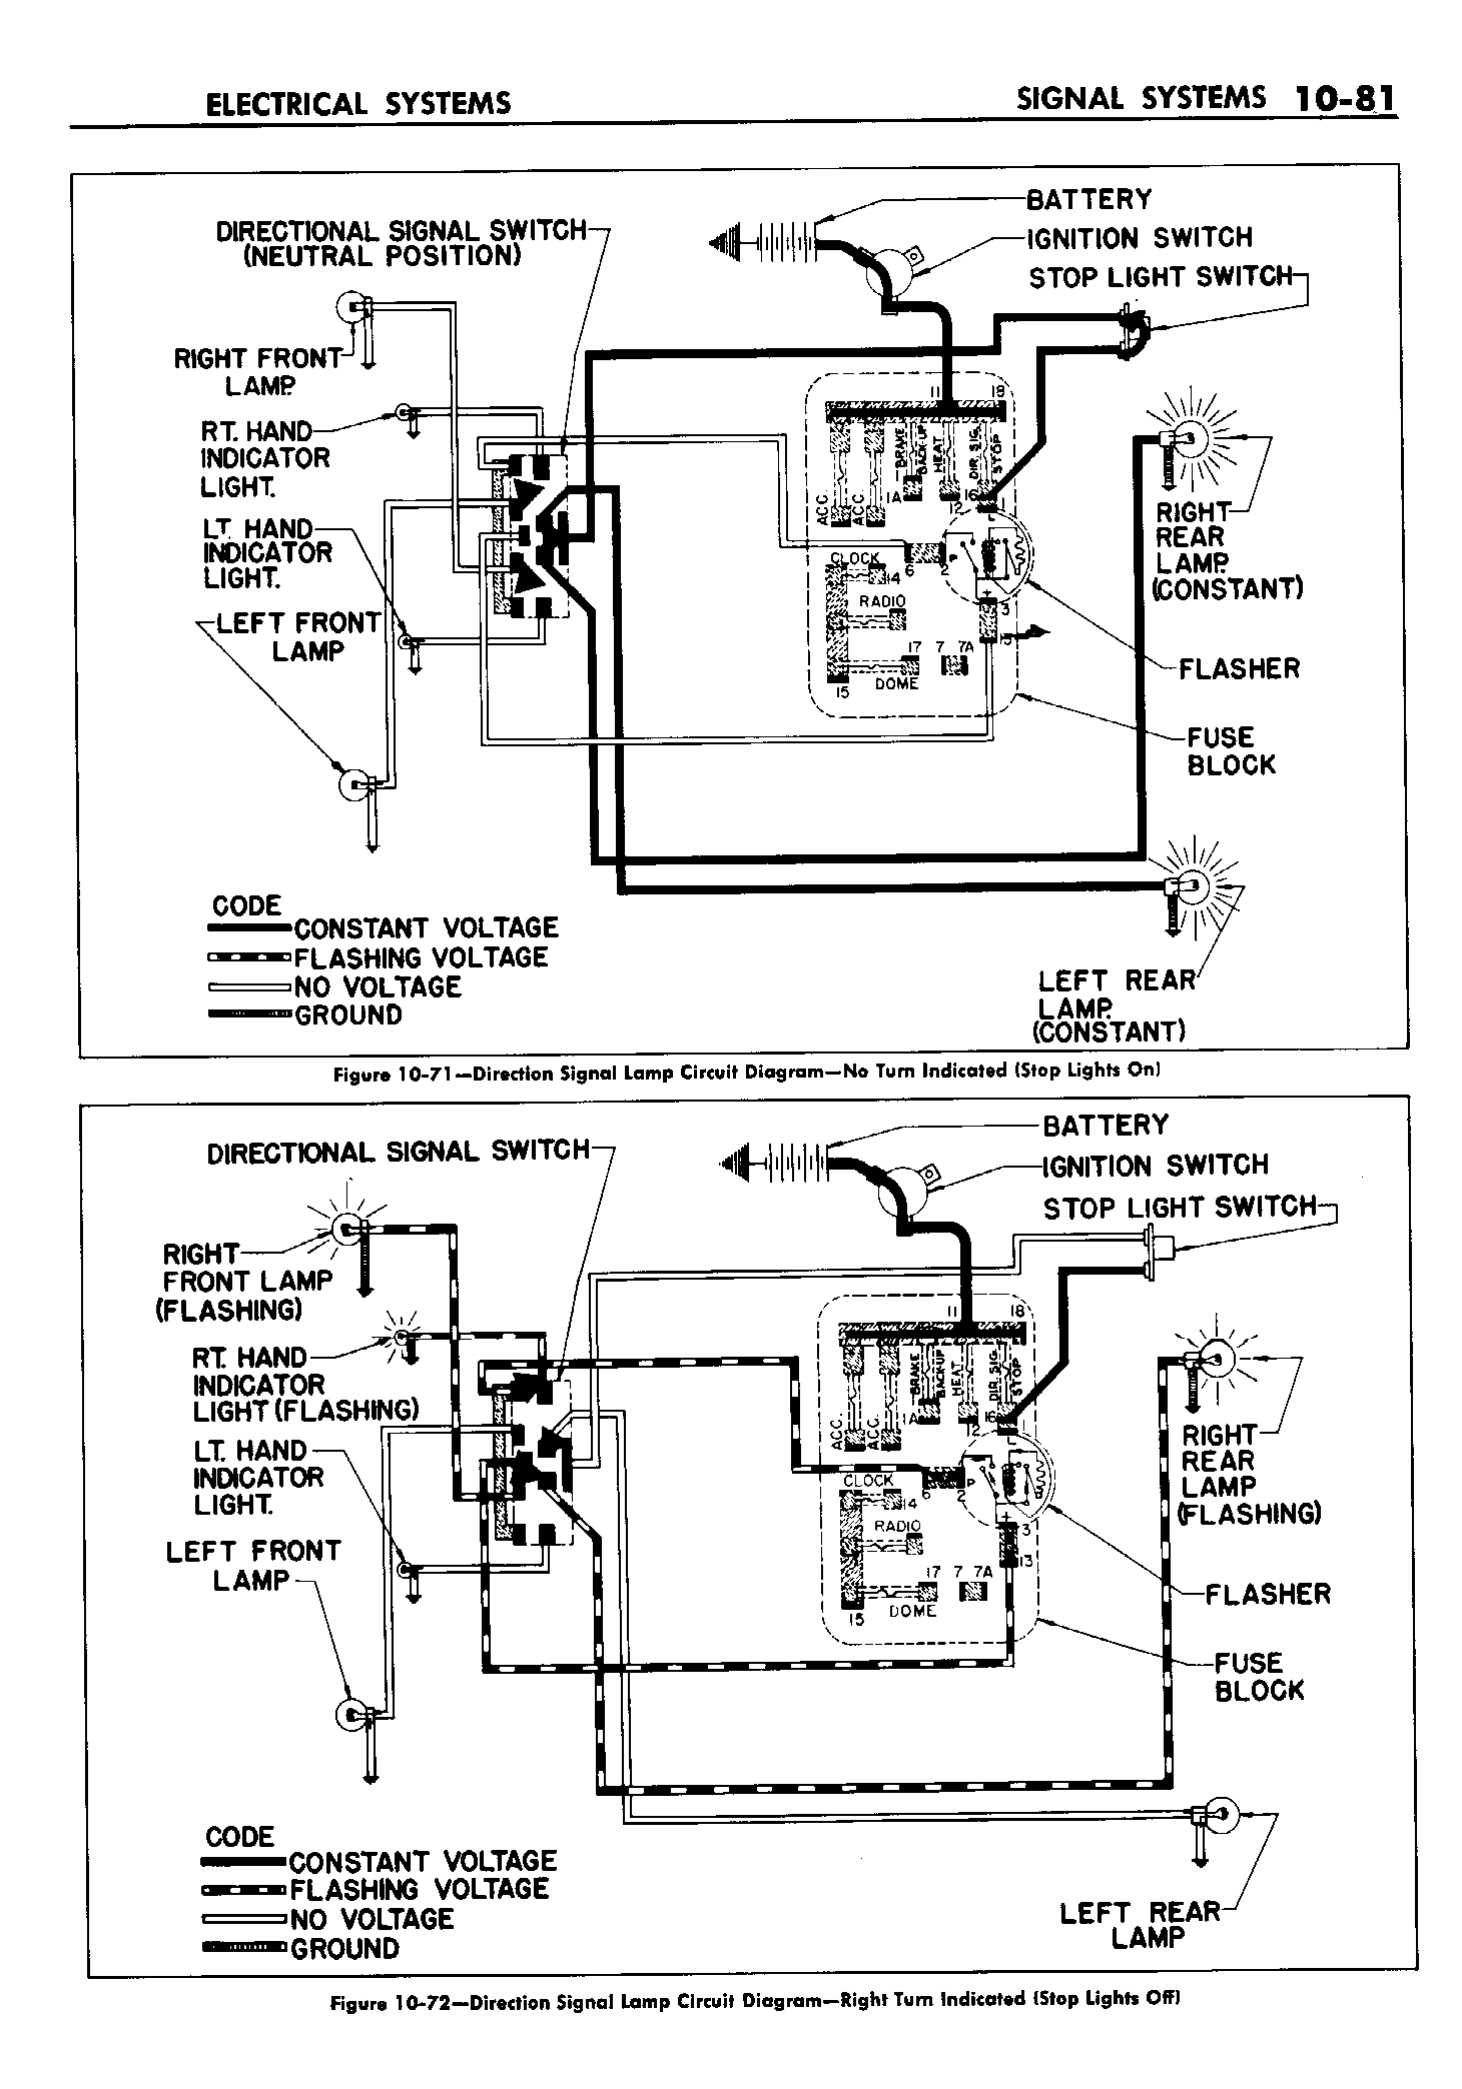 n_11 1958 Buick Shop Manual - Electrical Systems_81.jpg